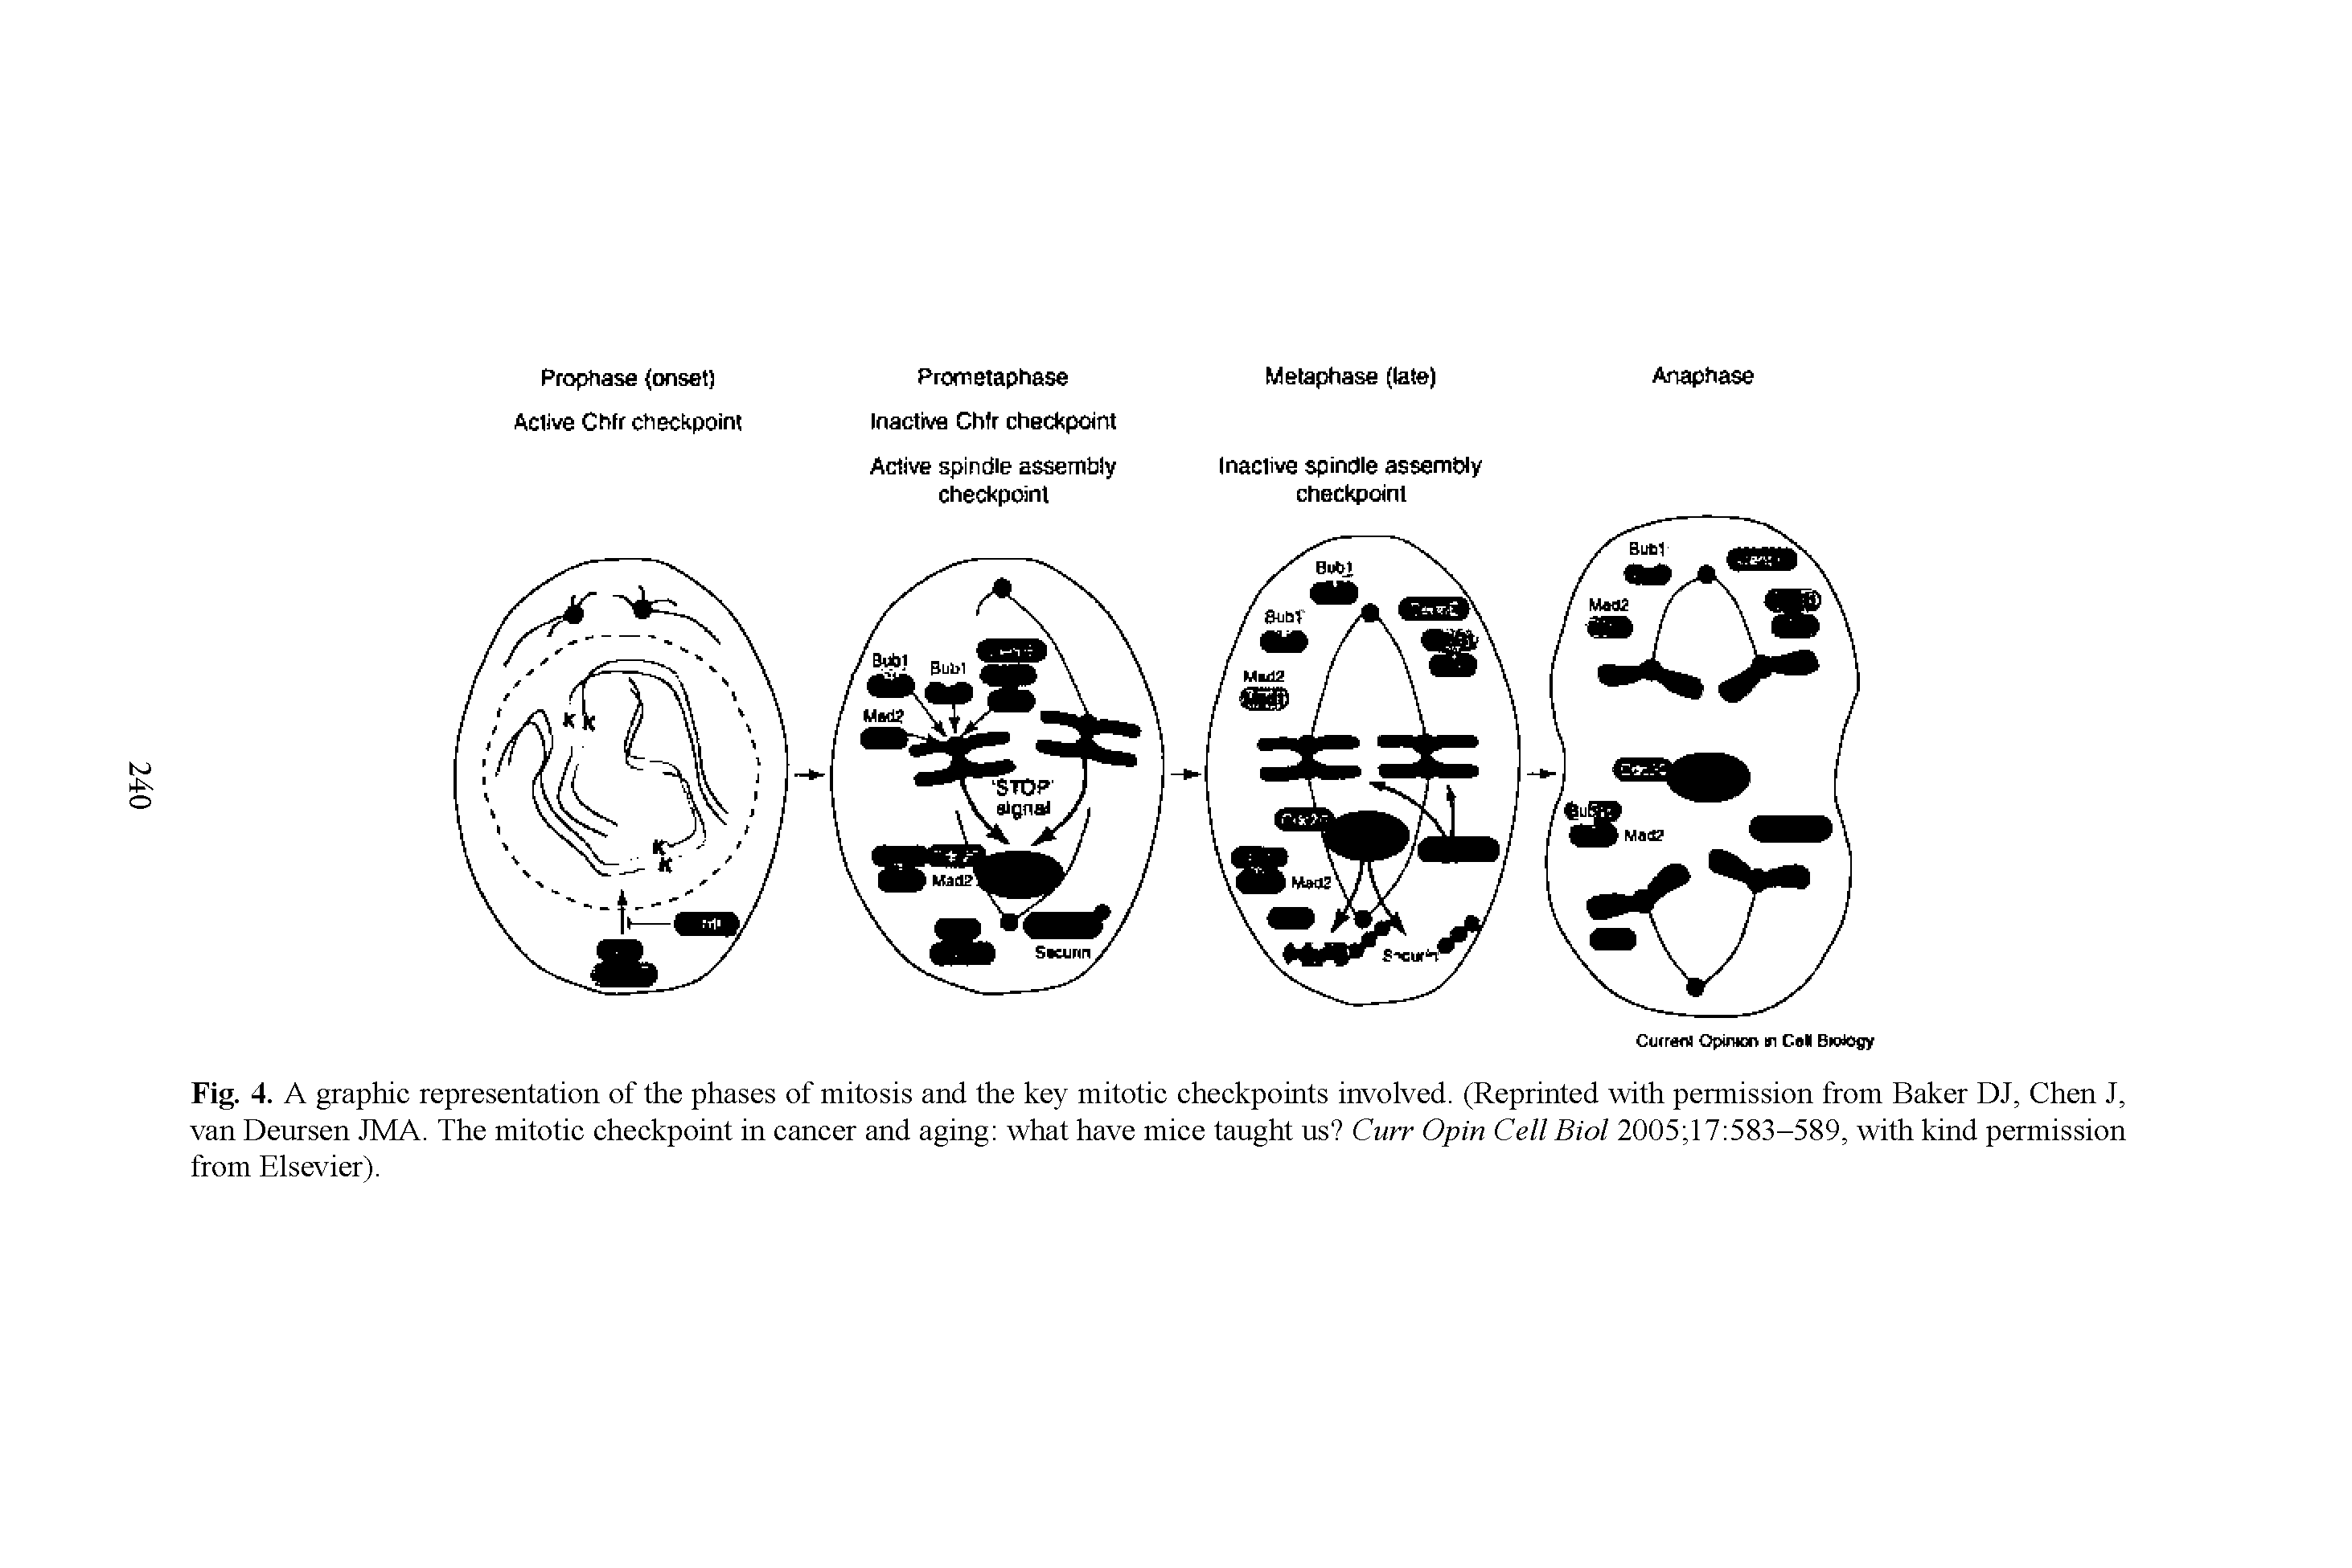 Fig. 4. A graphic representation of the phases of mitosis and the key mitotic checkpoints involved. (Reprinted with permission from Baker DJ, Chen J, van Deursen JMA. The mitotic checkpoint in cancer and aging what have mice taught us Curr Opin Cell Biol 2005 17 583-589, with kind permission from Elsevier).